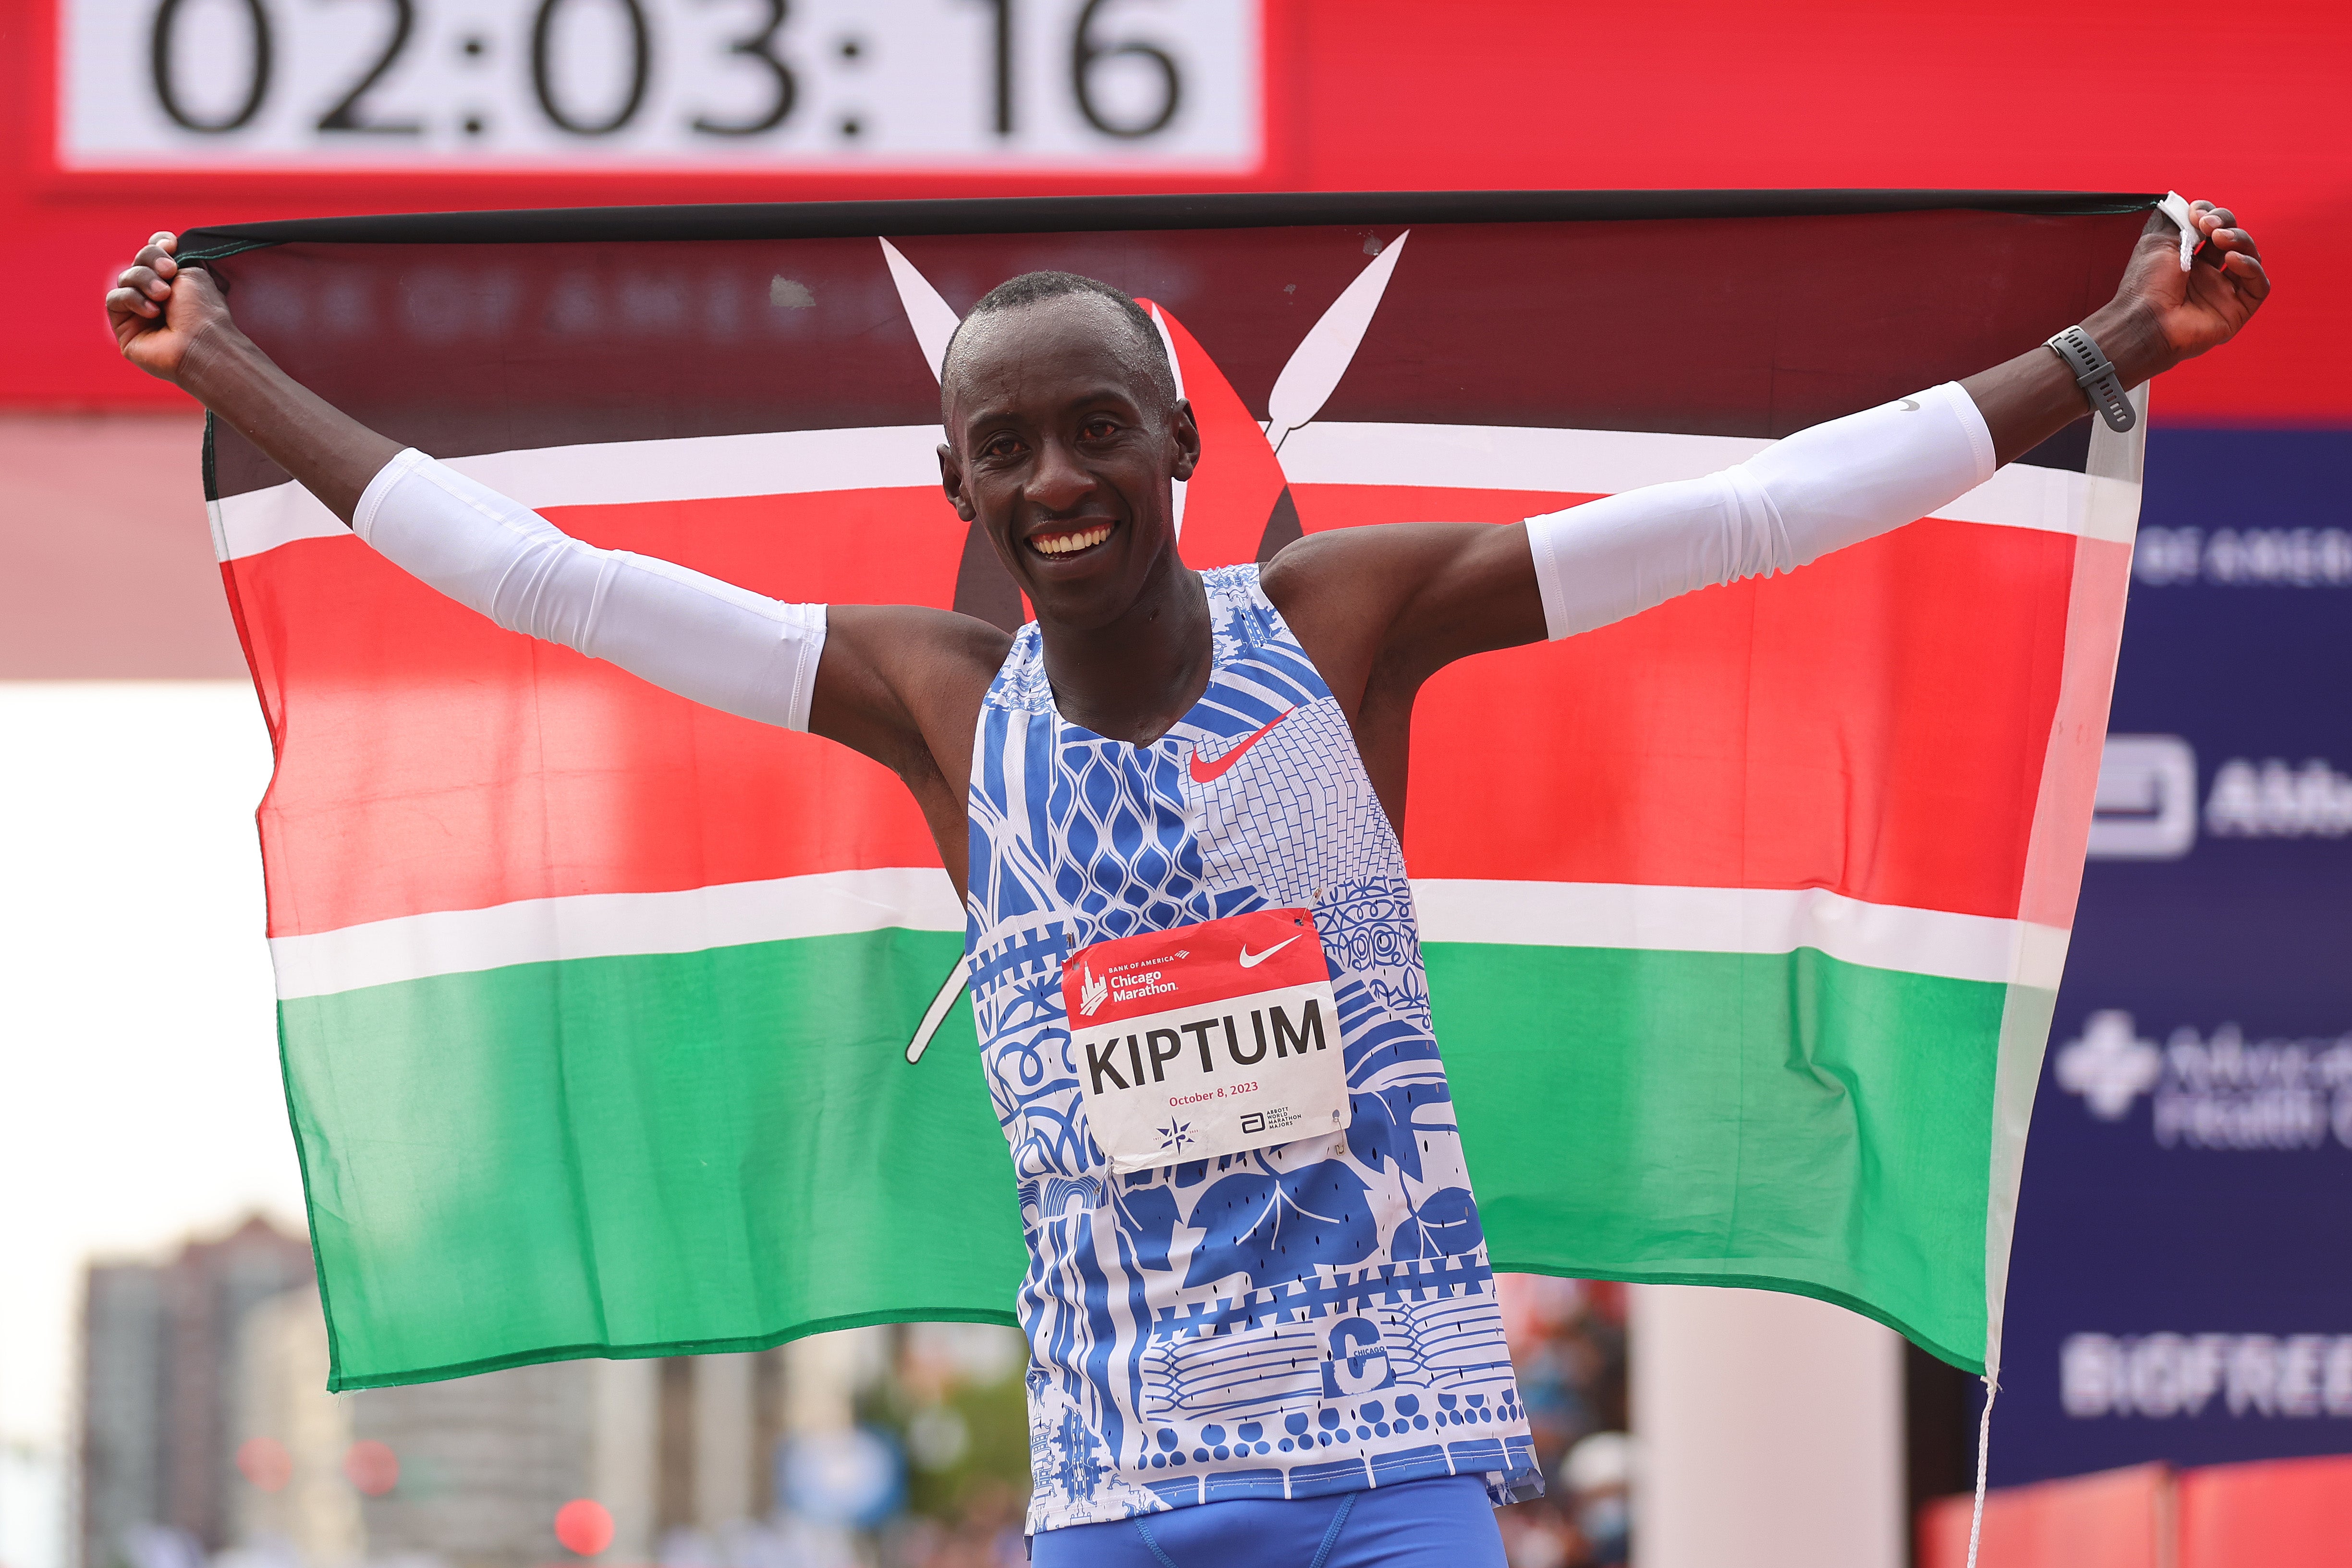 Kelvin Kiptum had been set to challenge the two-hour barrier